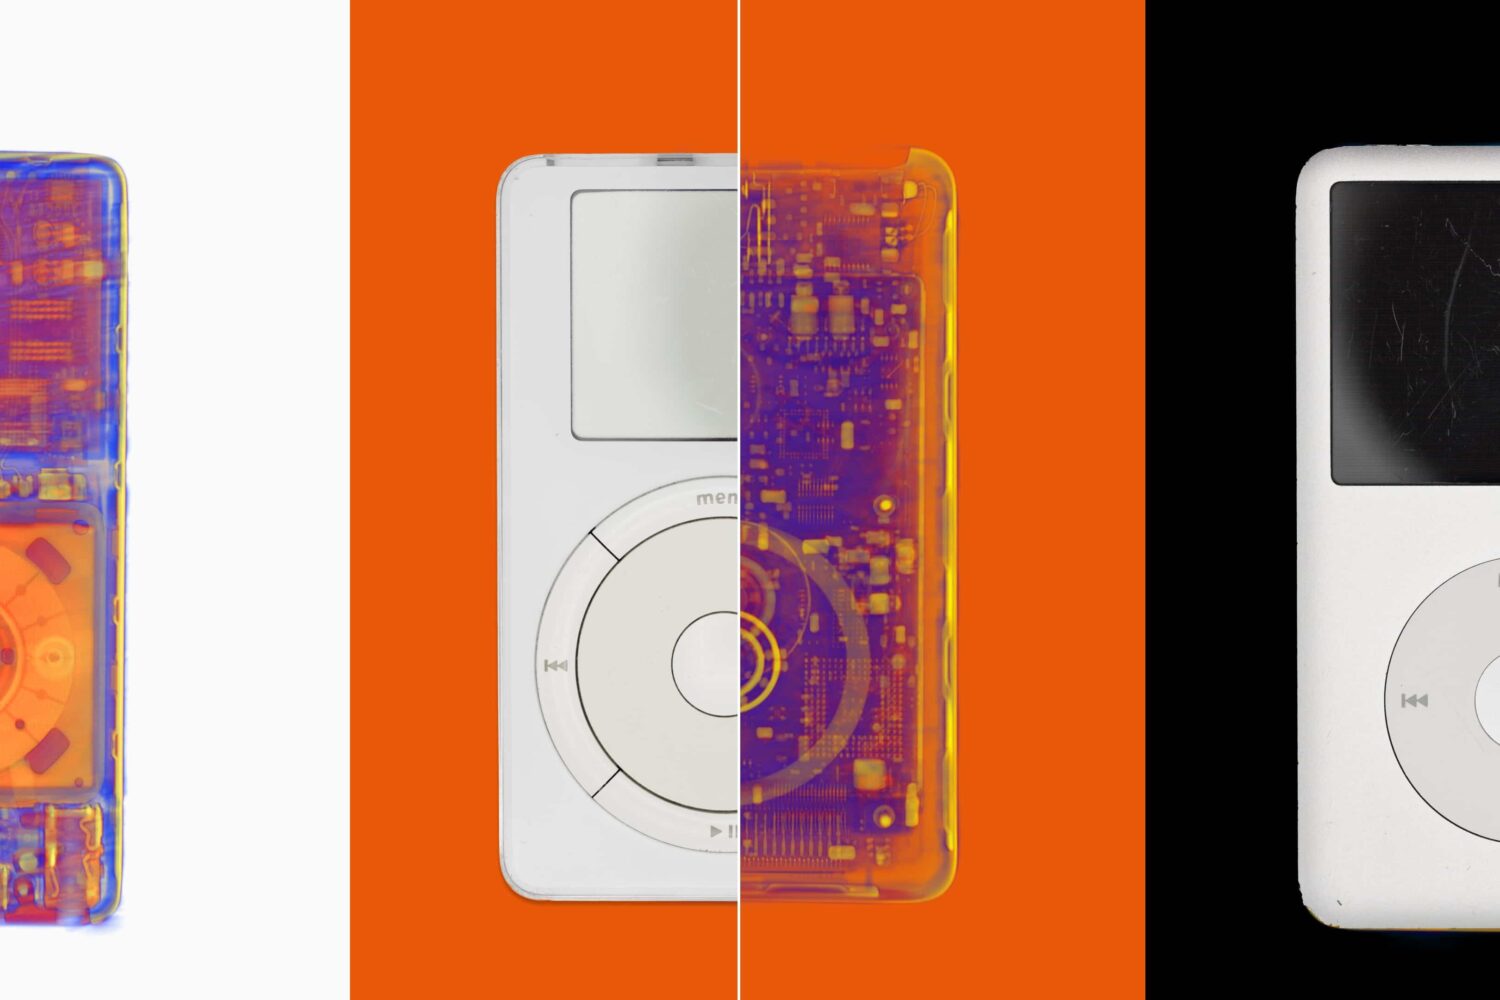 Before vs. after comparison of normal vs. X-ray scans of Apple's original iPod, iPod classic and iPod nano music players